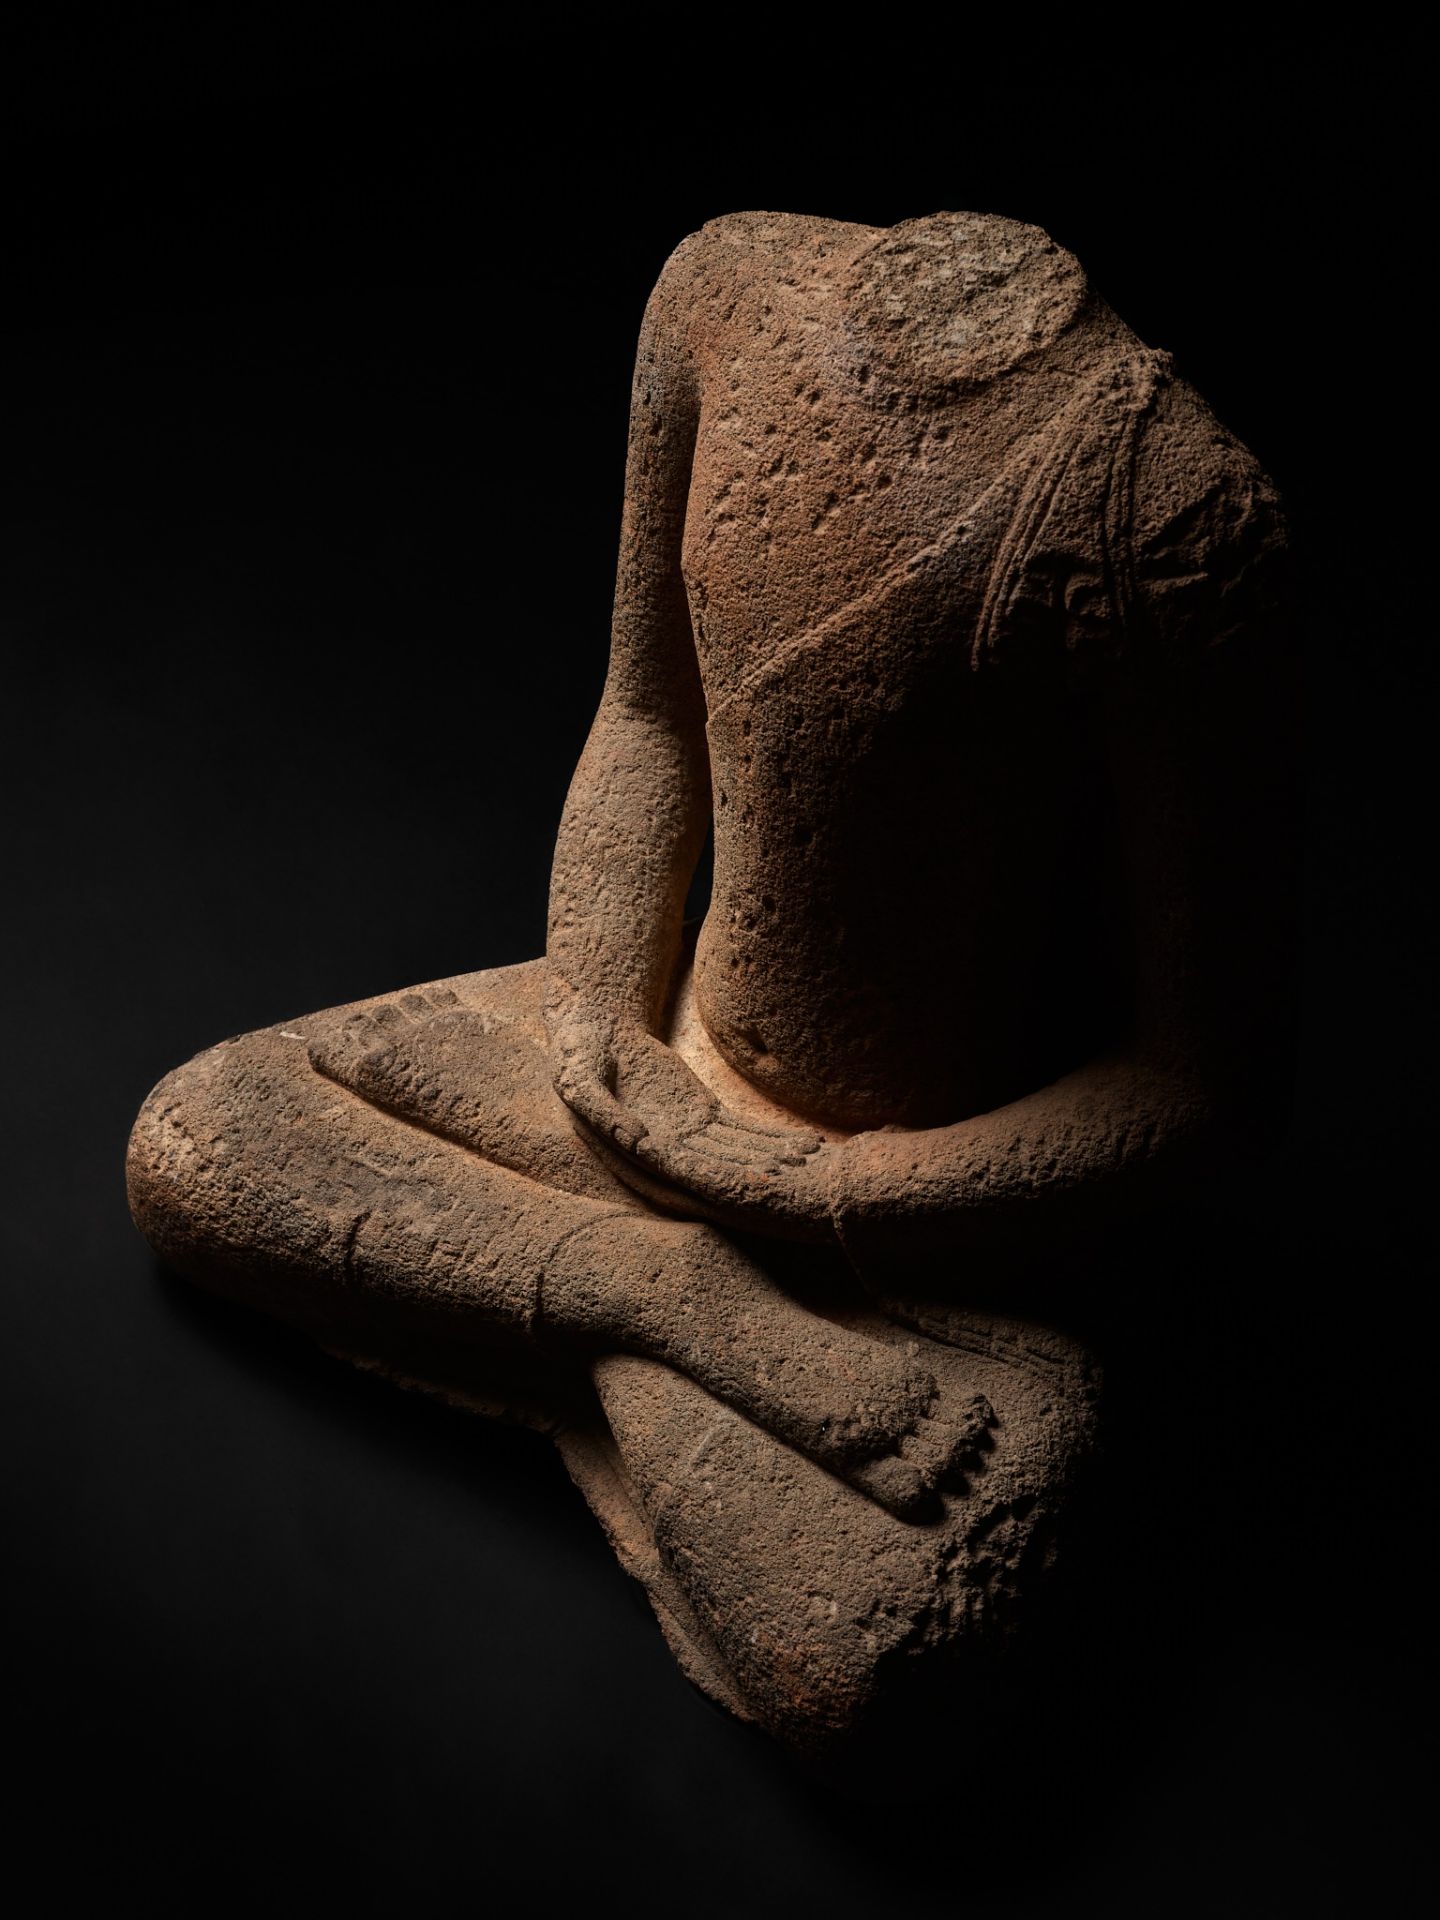 A RARE AND LARGE ANDESITE TORSO OF BUDDHA AMITABHA, CENTRAL JAVANESE PERIOD, SHAILENDRA DYNASTY - Image 3 of 16